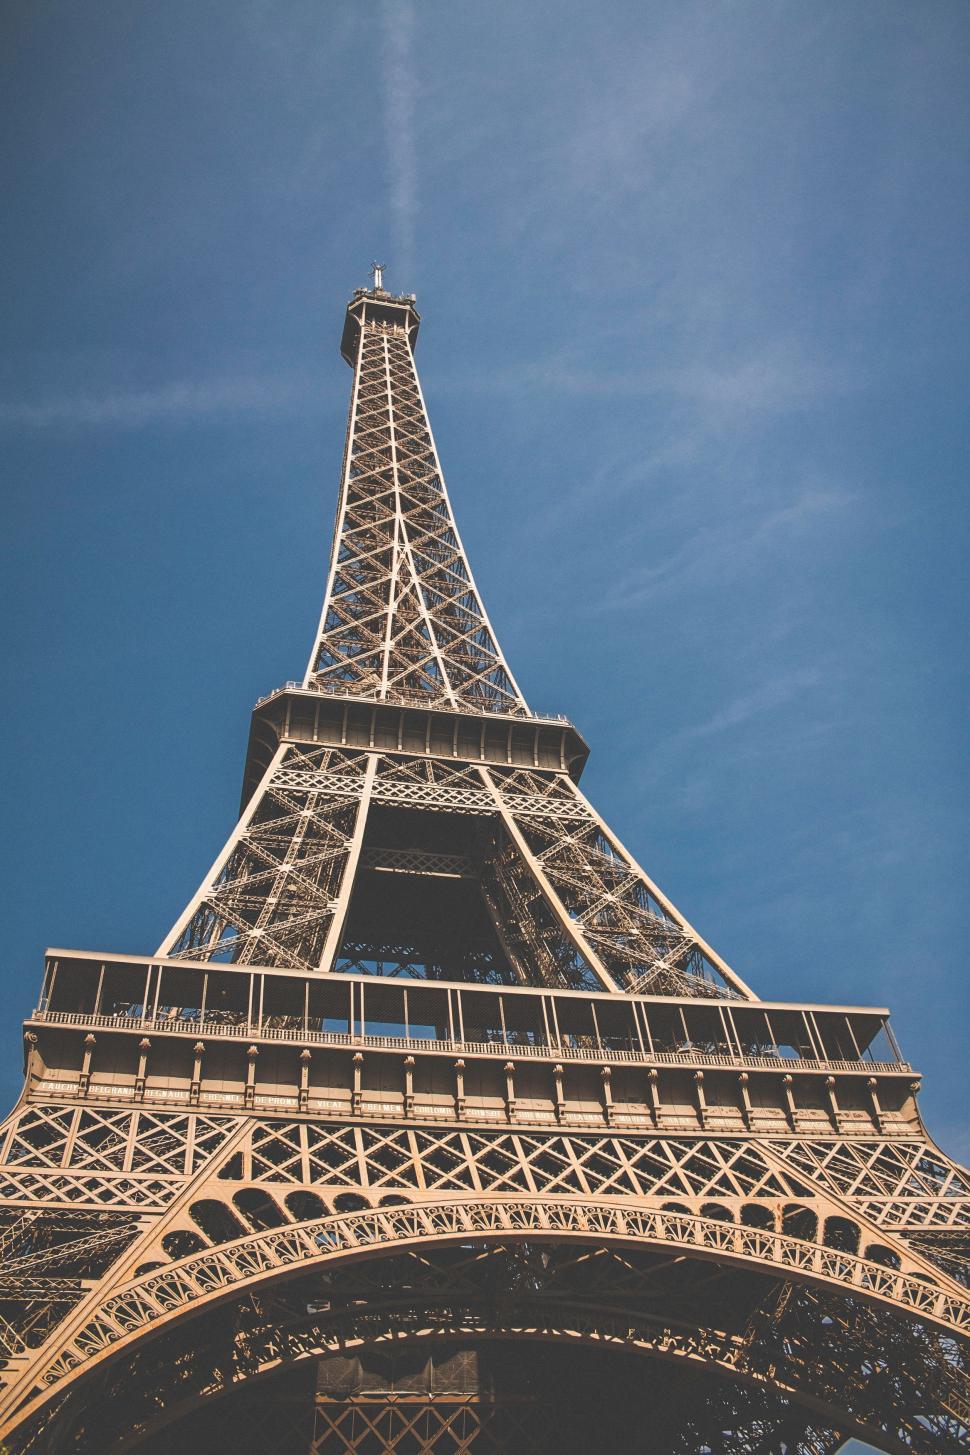 Free Image of The Top of the Eiffel Tower Against a Blue Sky 